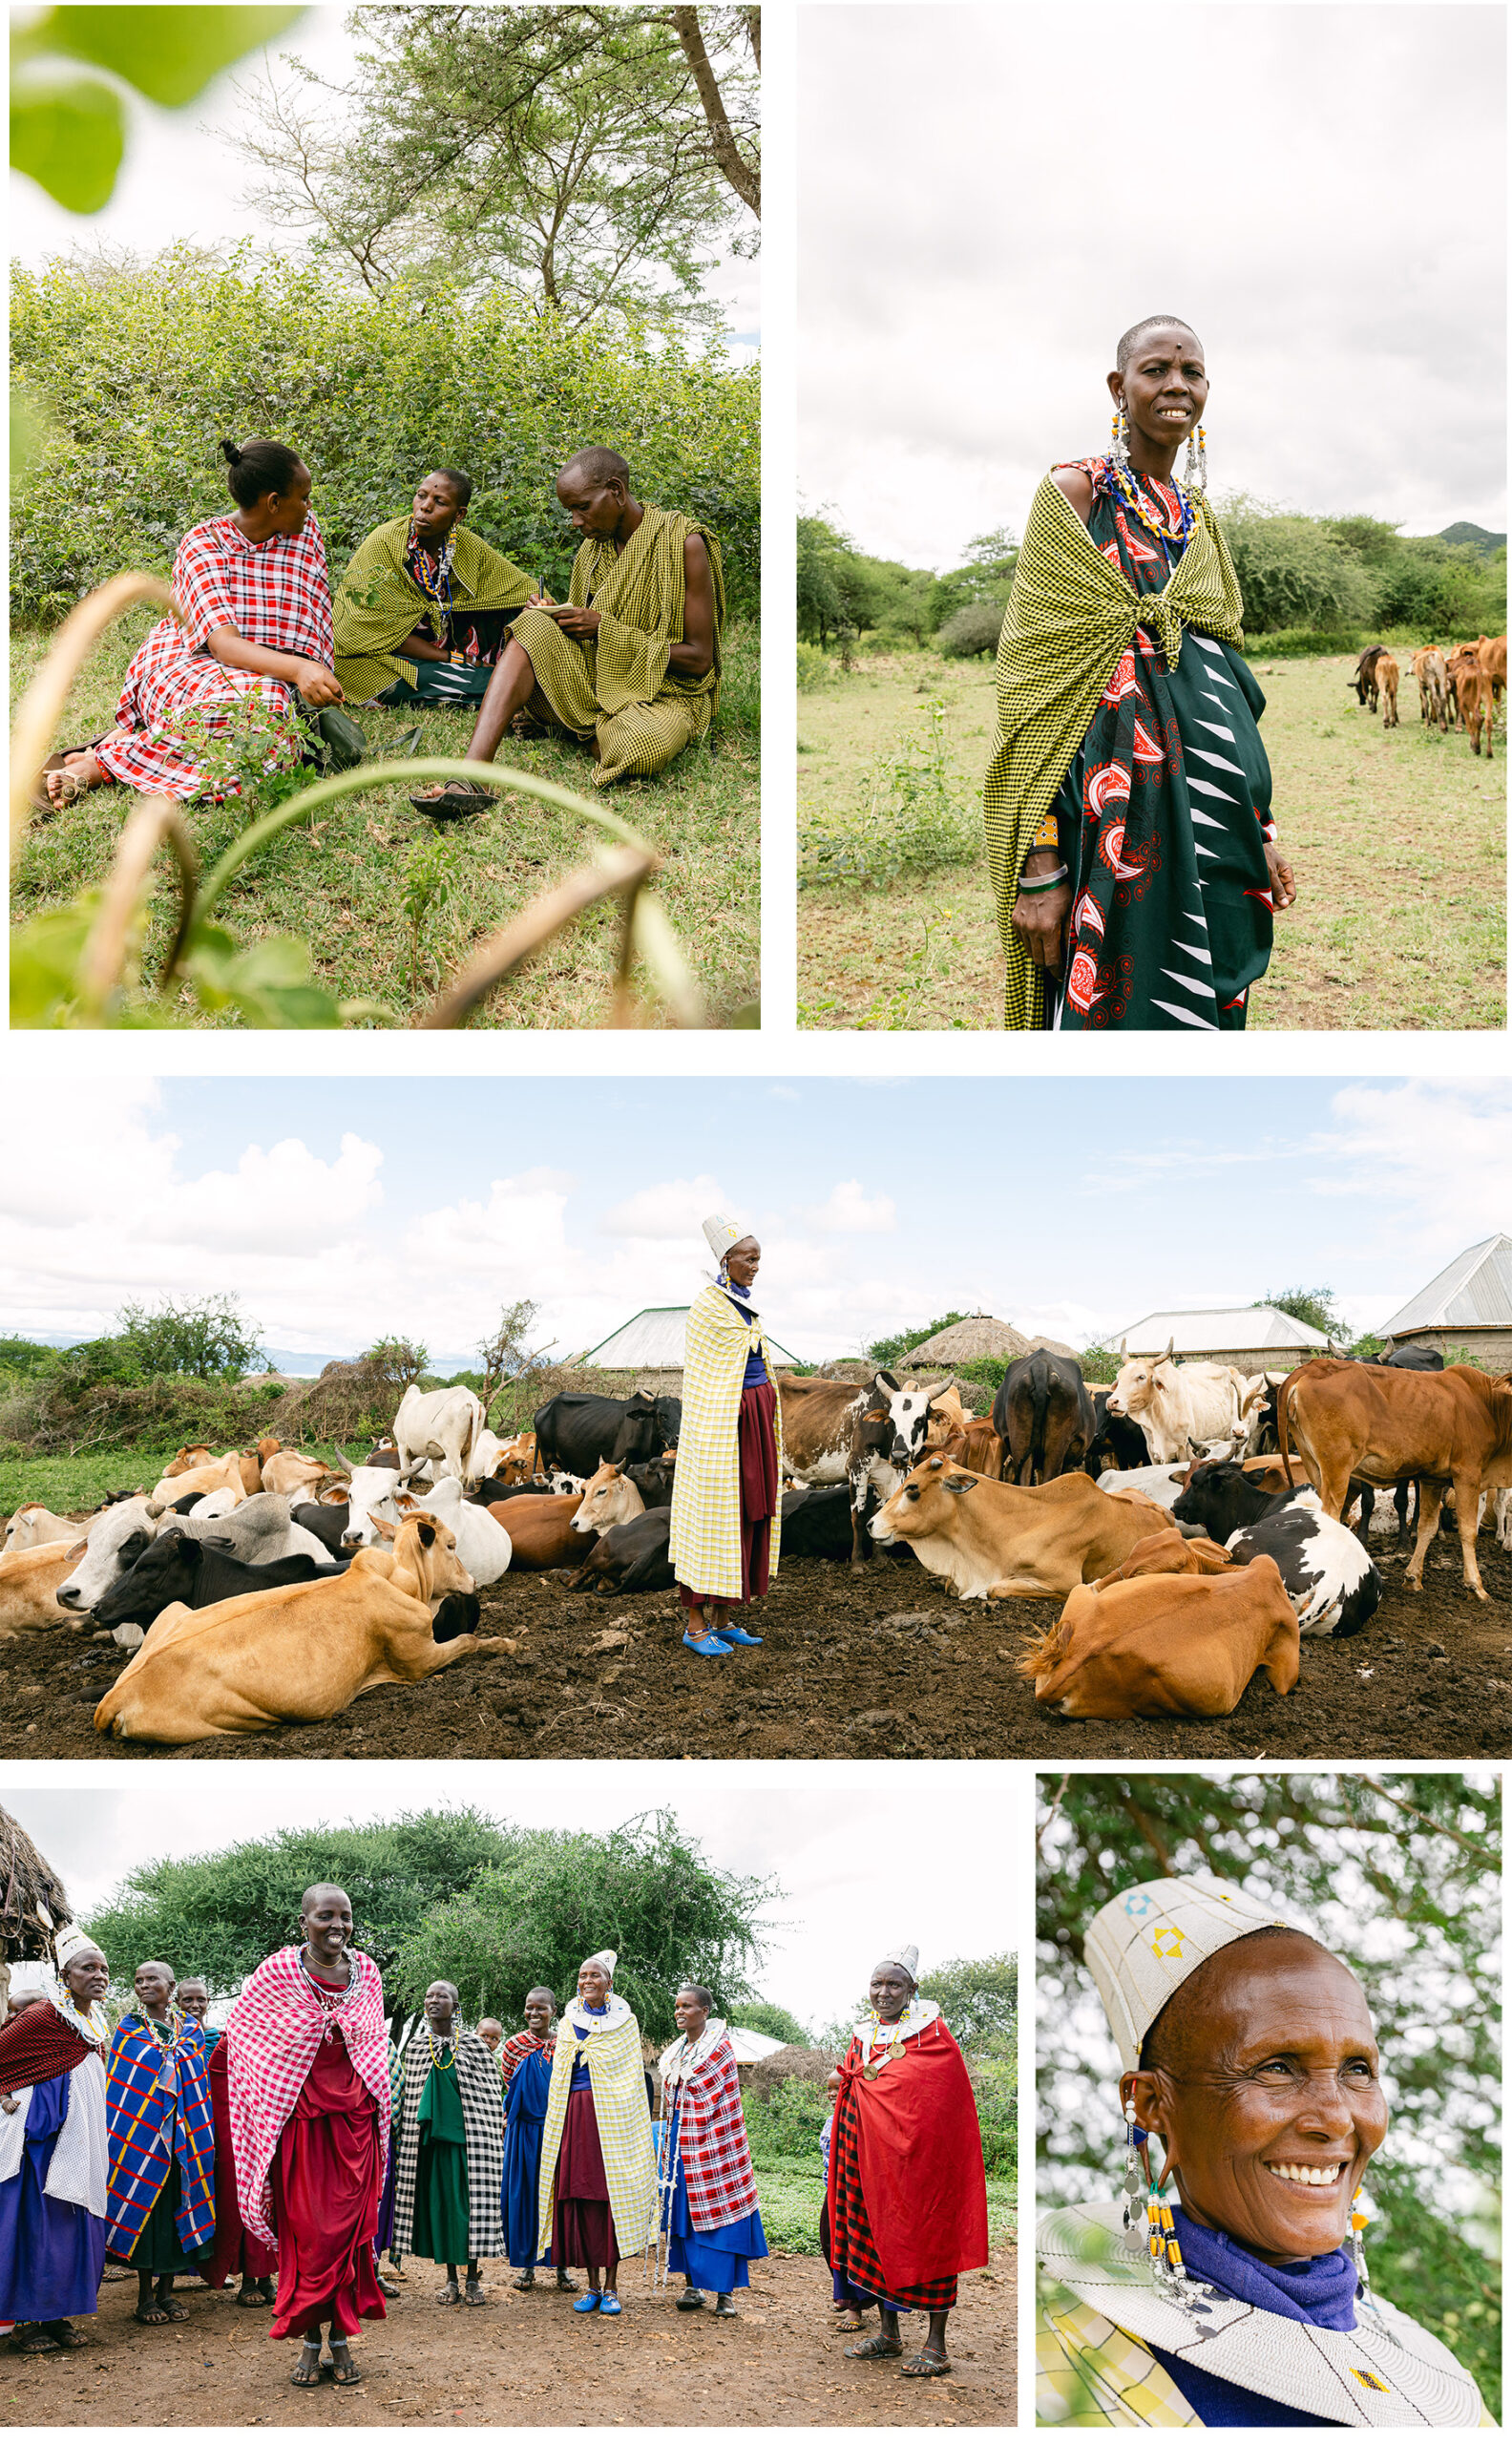 Collection of photos of the 2024 Ashden Award winner Ujamaa Community Resource Team. At the top on the left-hand side are three people sitting on grass talking to each other. On the right-hand side is portrait of an indigeneous woman. Below is an indigenous woman surrounded by cows. Below on the left-hand side are tribe members jumping. On the right-hand side is a close up portrait of a woman smiling. 